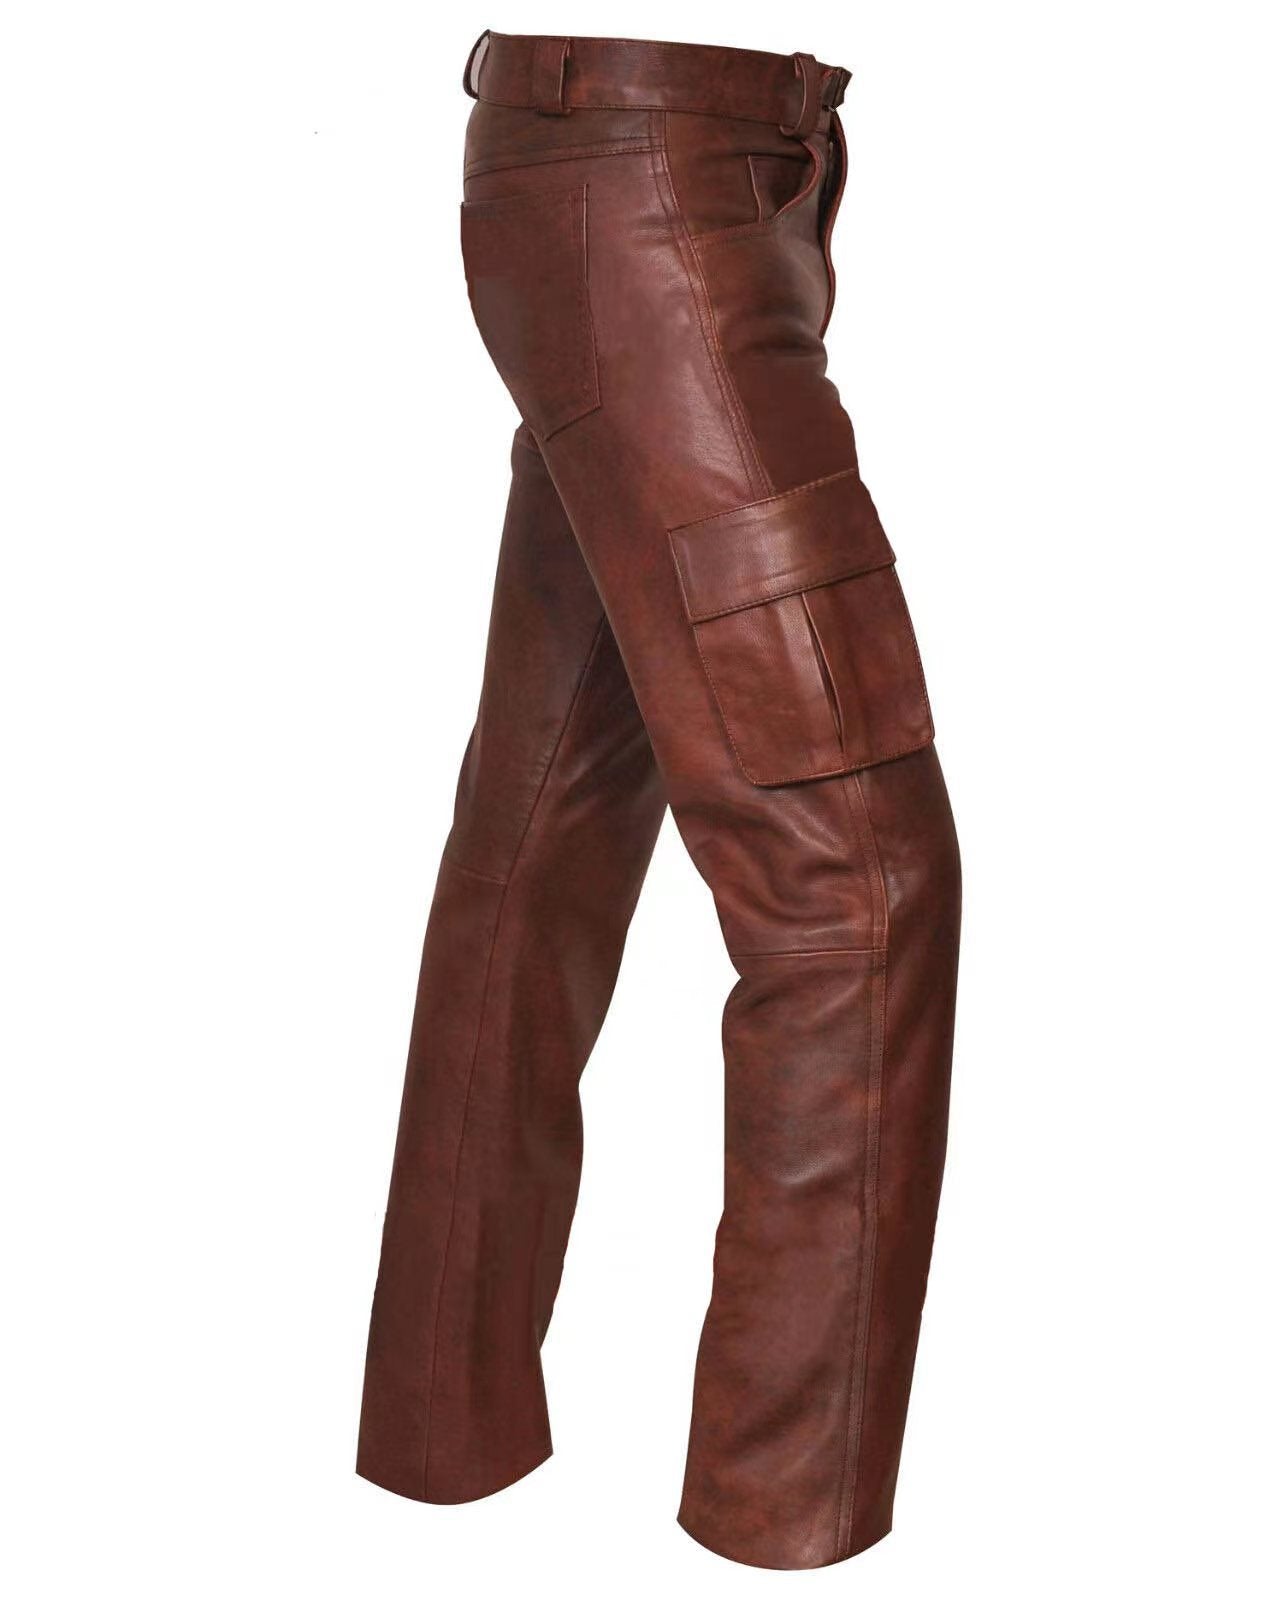 Solid Color Men's PU Leather Casual Leather Pants Trousers